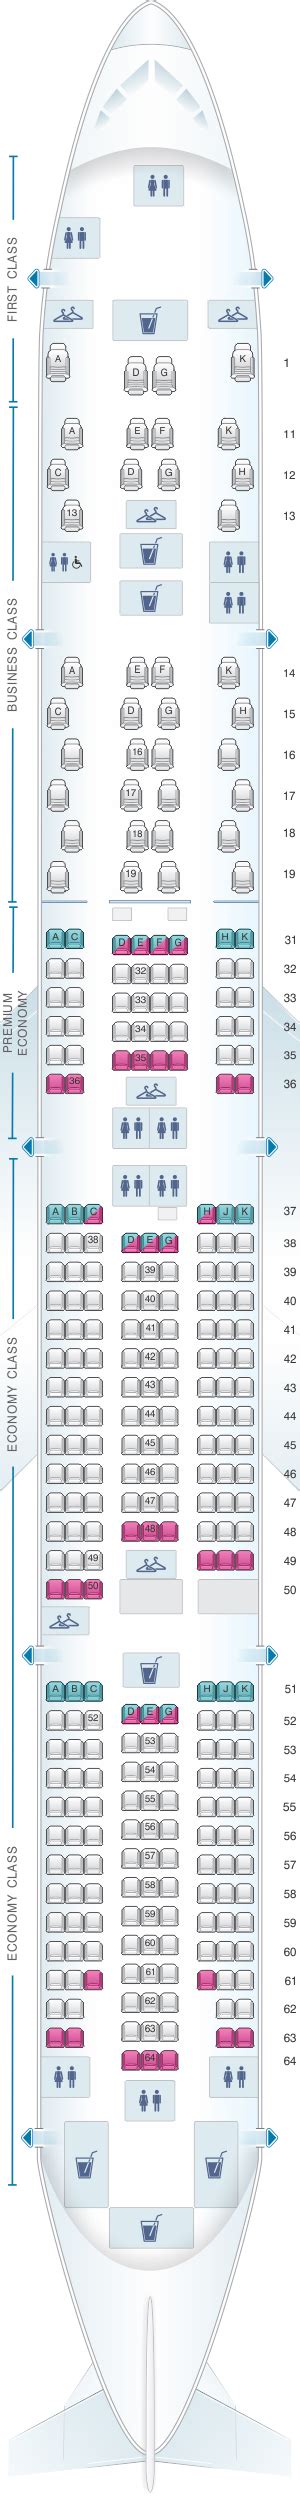 Seat Map China Southern Airlines Boeing B777 300er